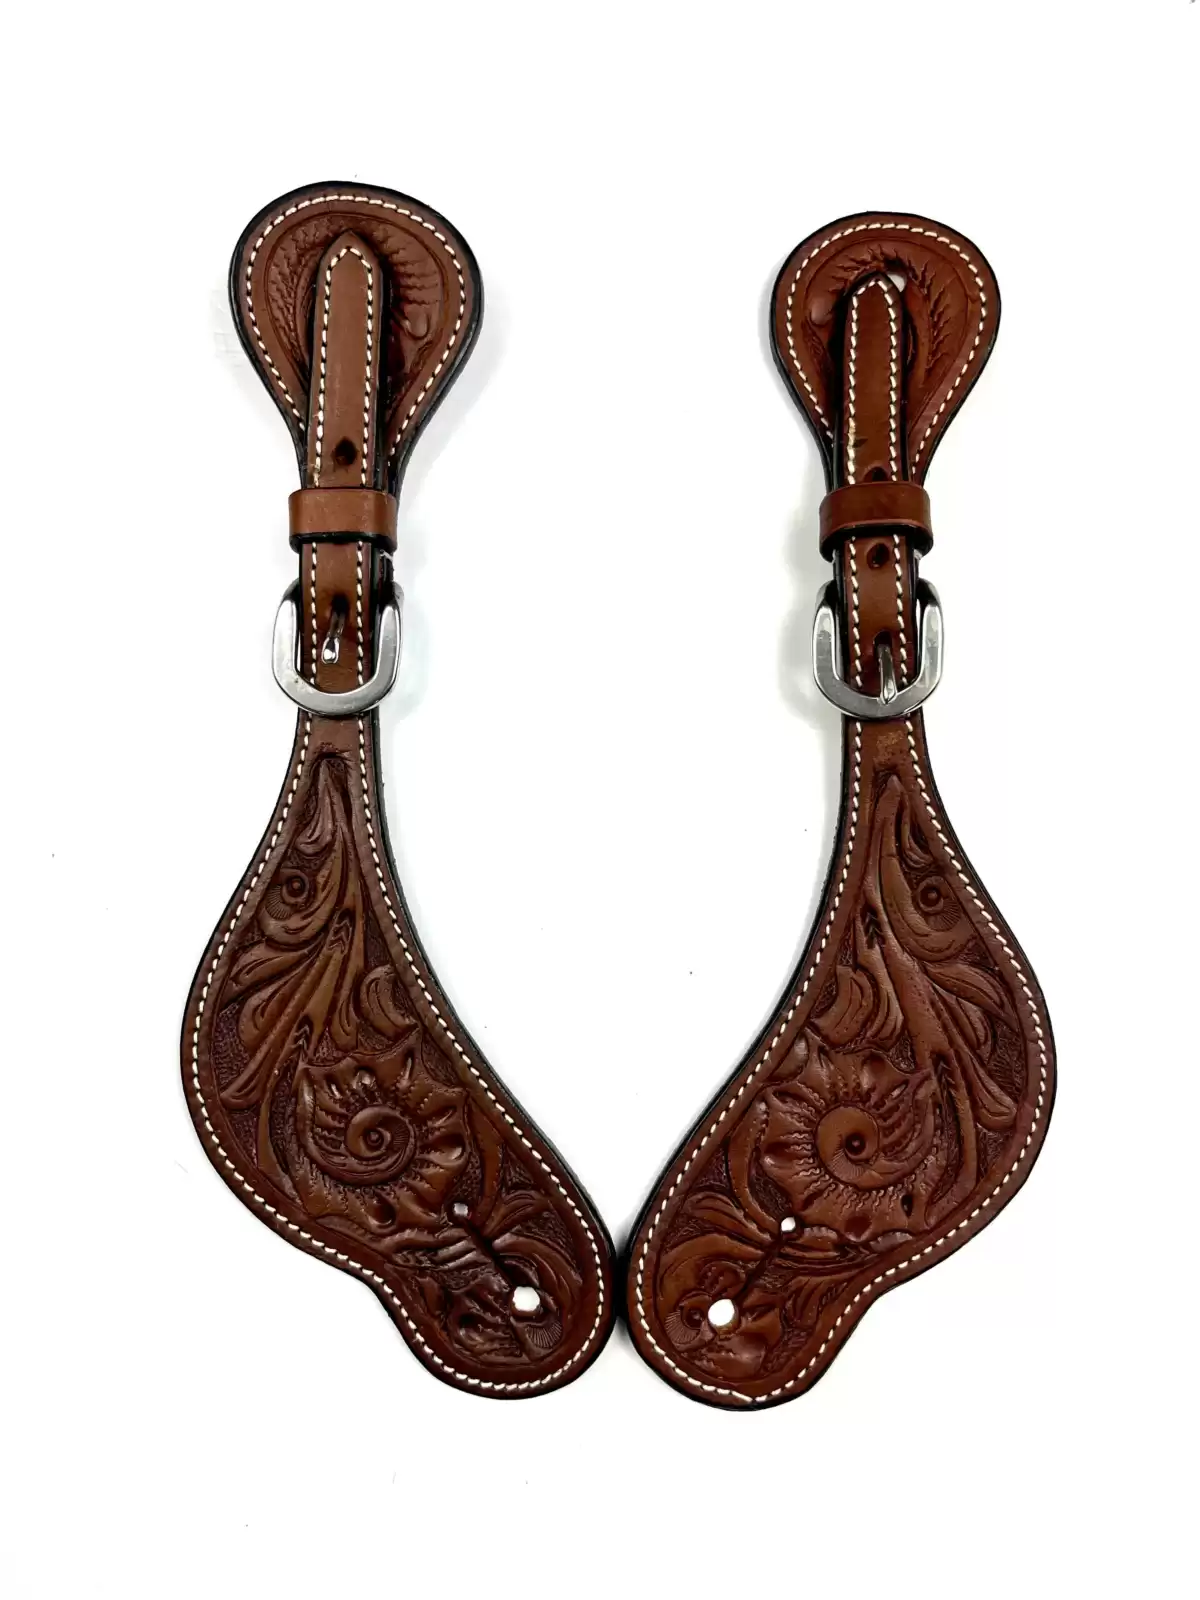 Ezy Ride Spur Strap Shaped With Floral Stamping Chocolate